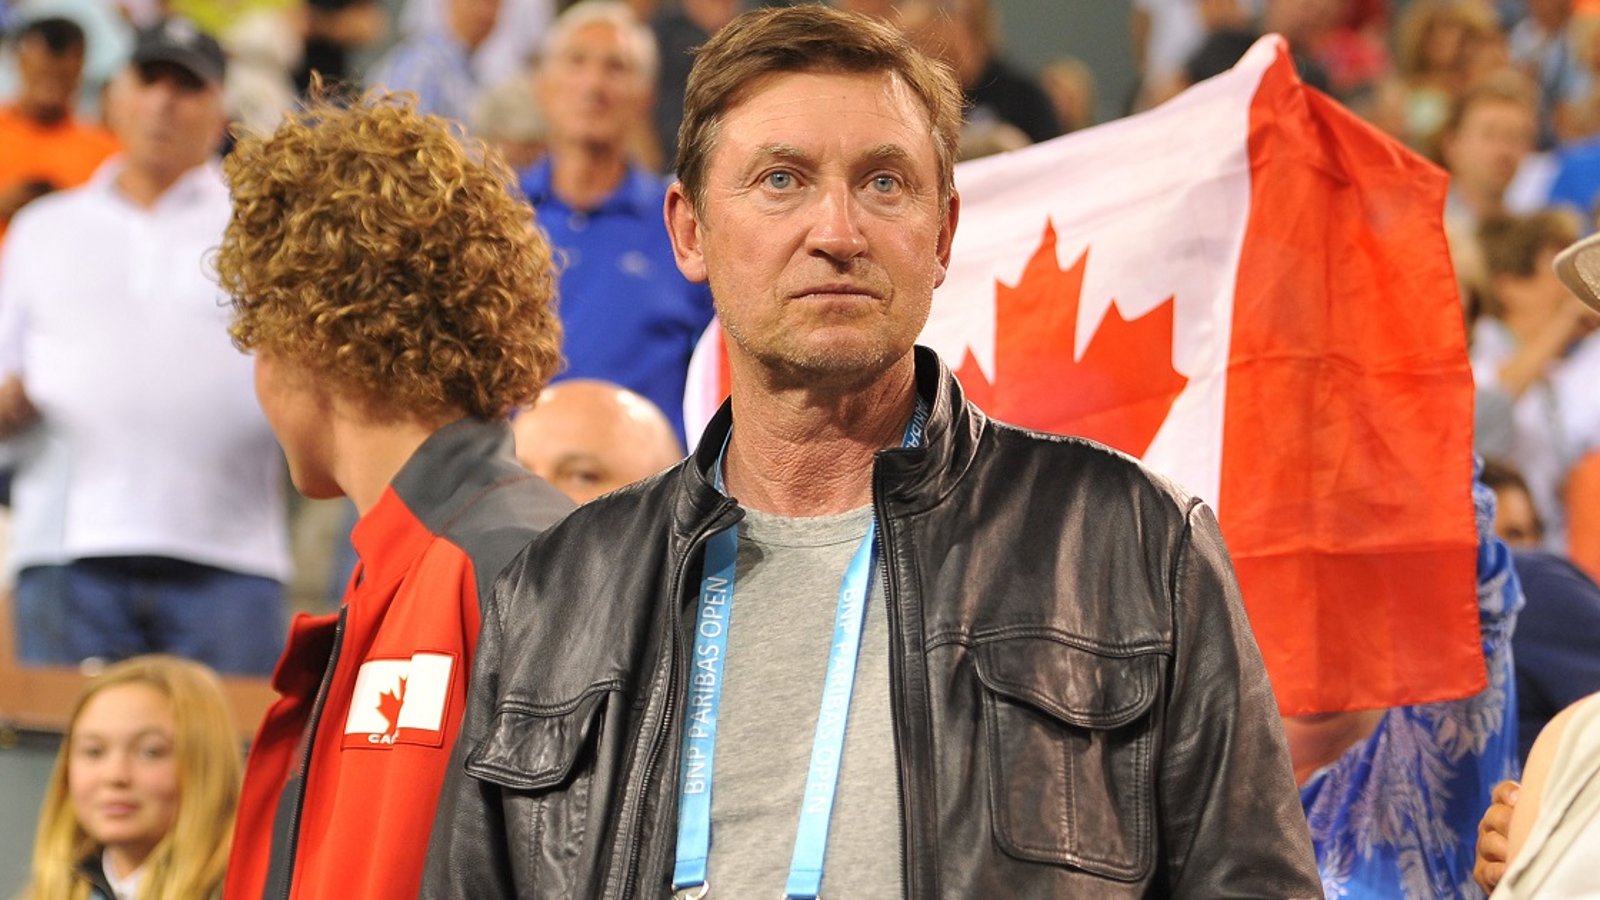 Wayne Gretzky turned down 25% ownership stake in the Canucks.